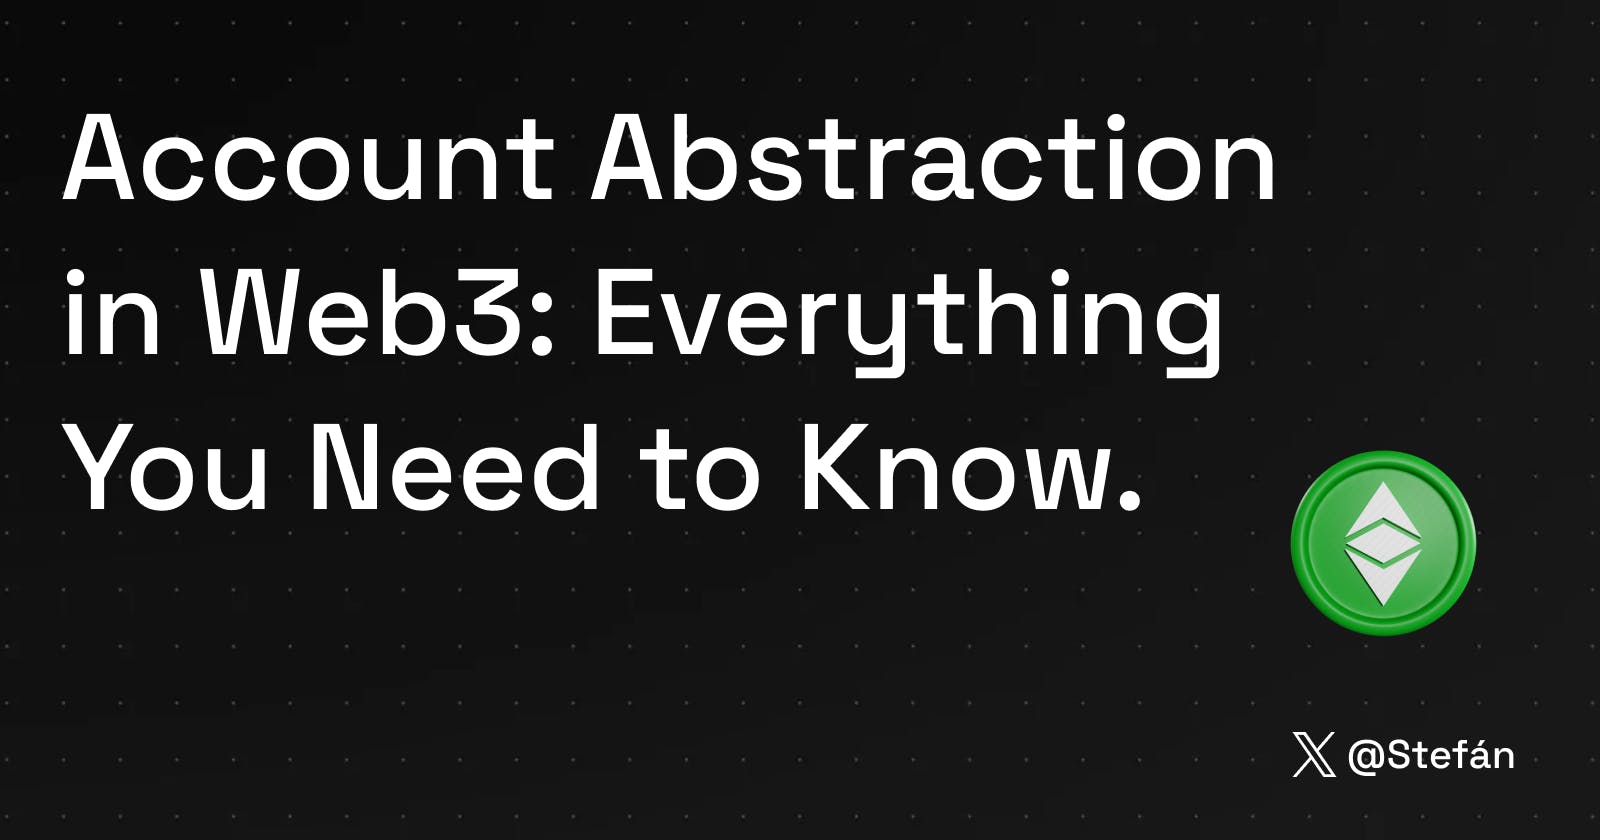 Account Abstraction in Web3: Everything You Need to Know.